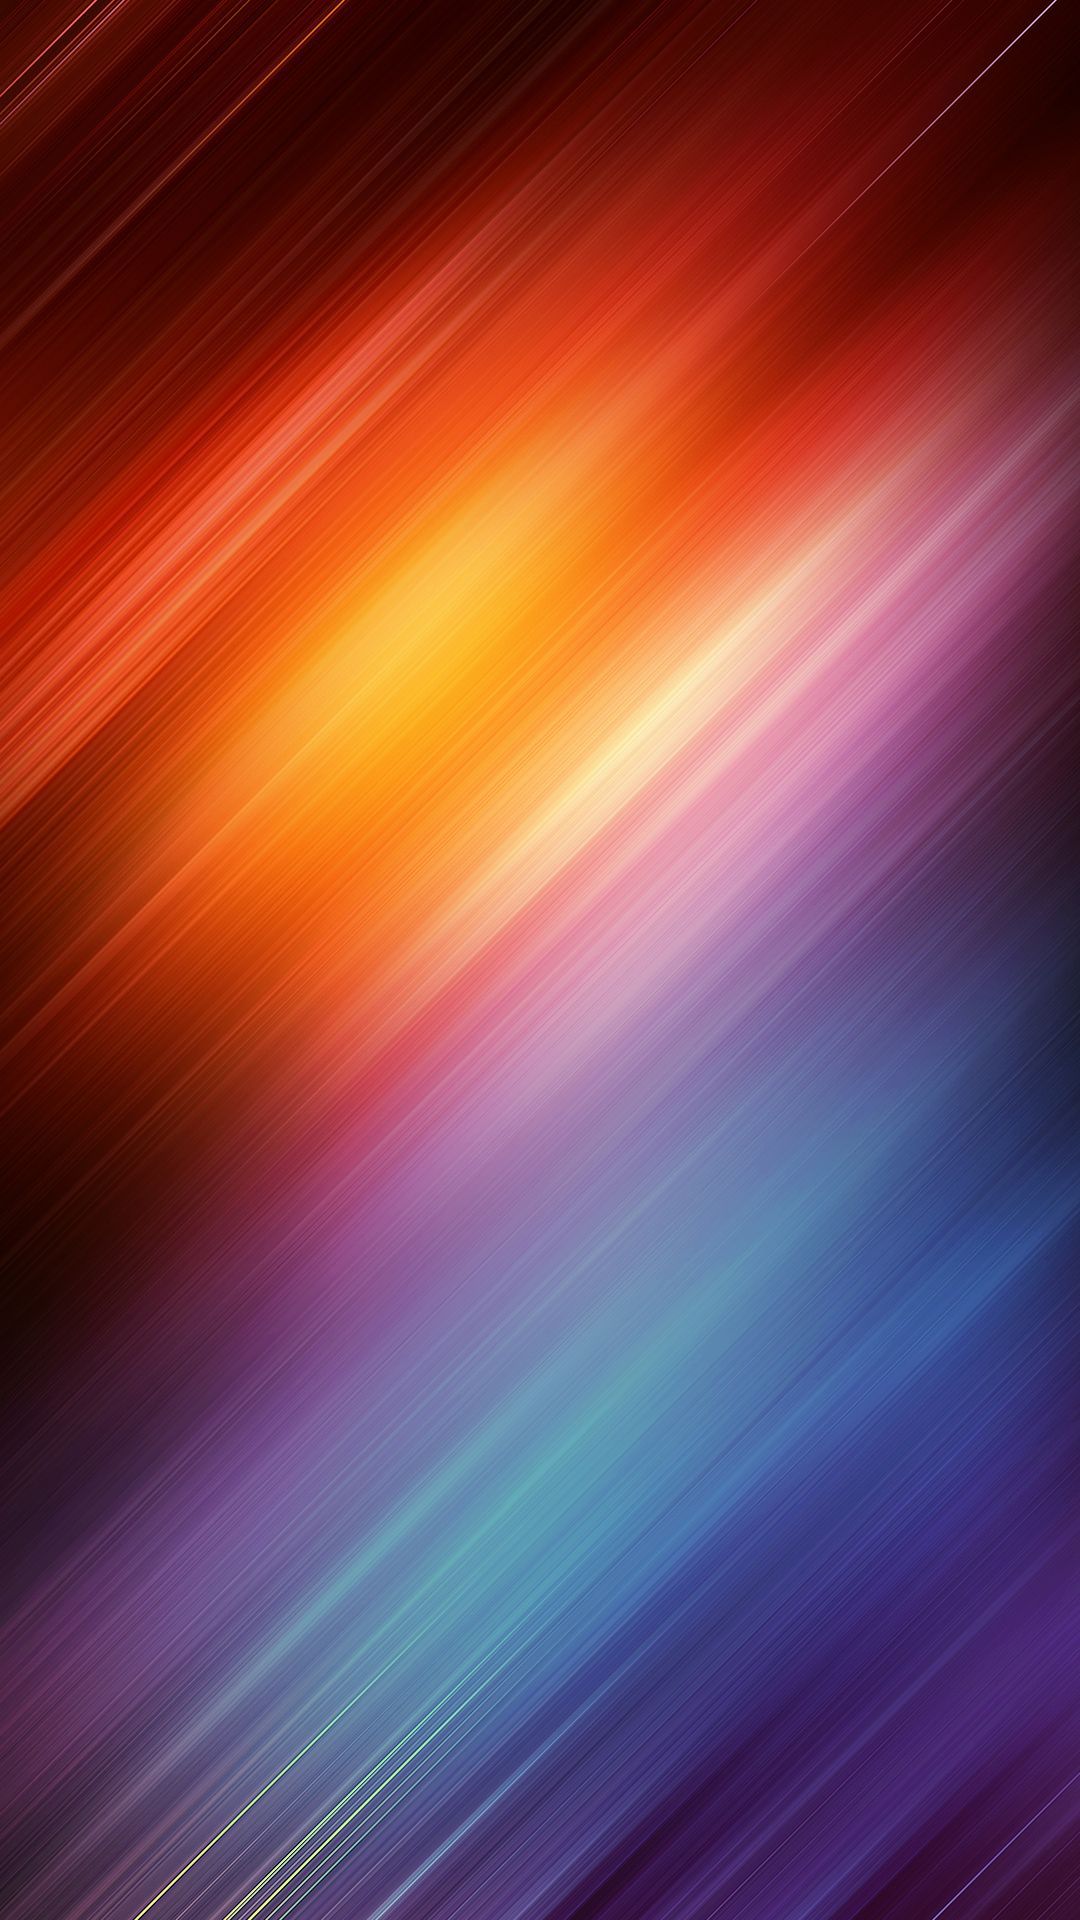 Vertical Abstract Wallpaper, HD Vertical Abstract Background on WallpaperBat